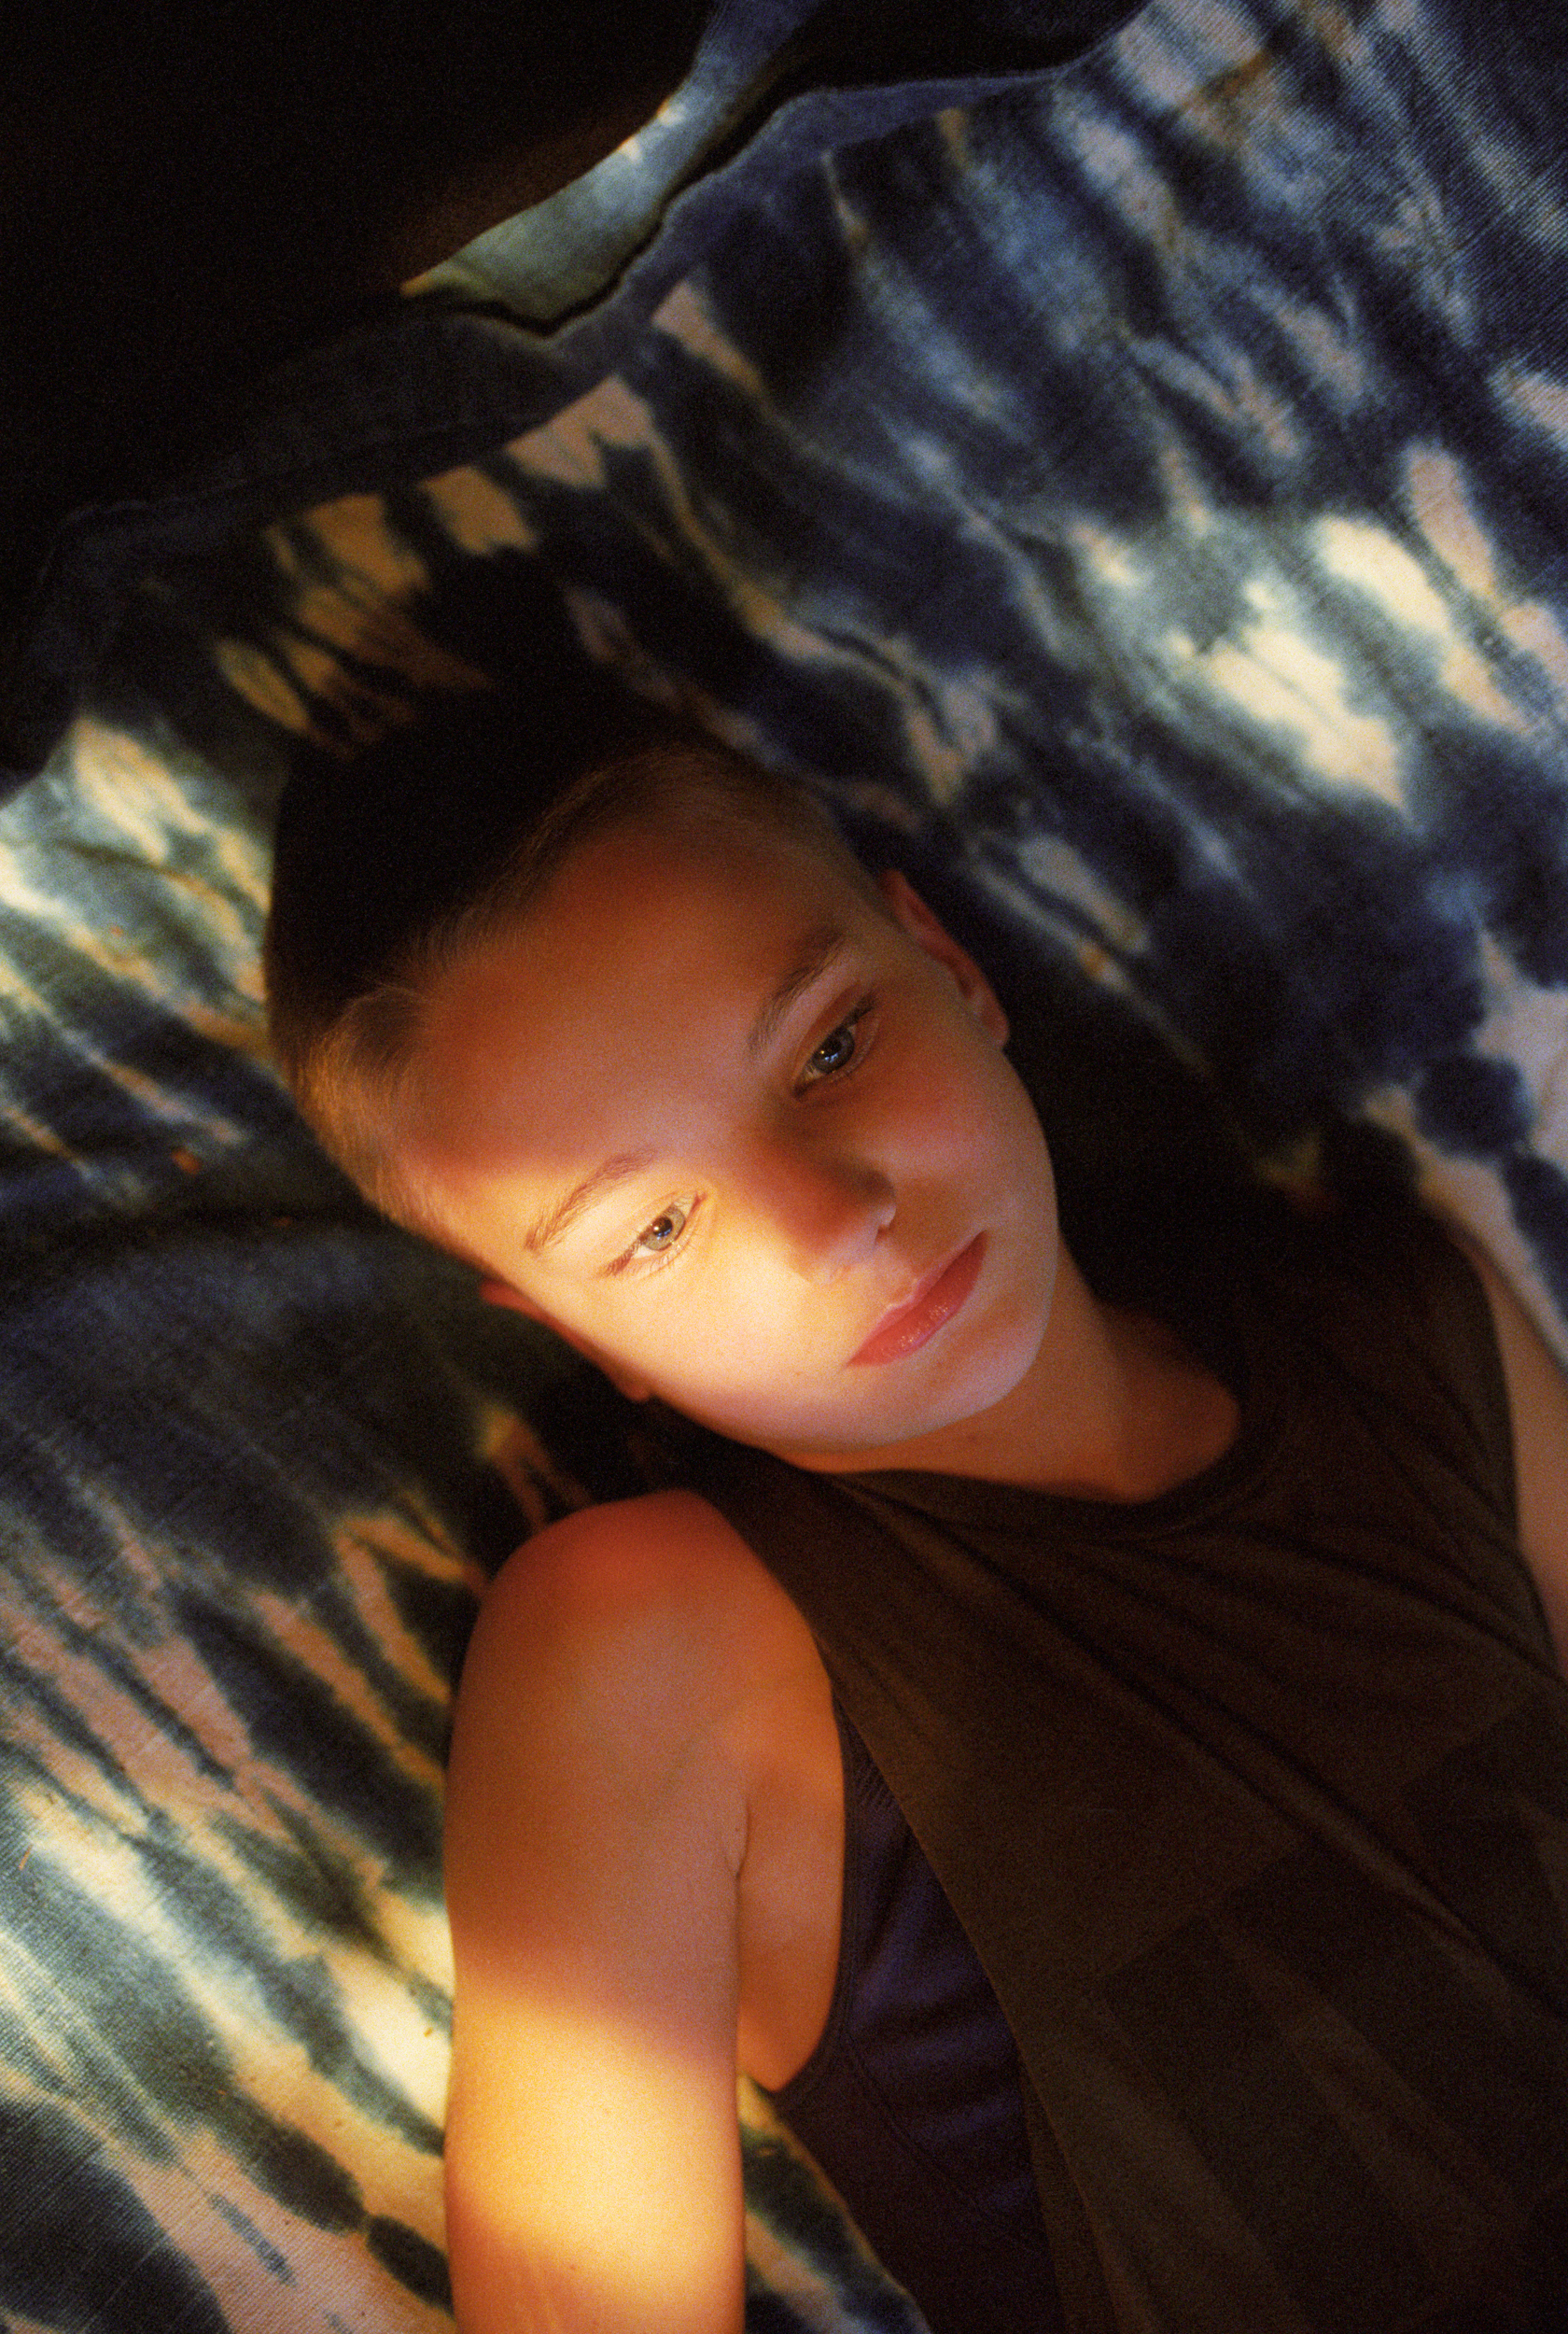 a person lays on a tie-dye bedspread with sunlight on their face